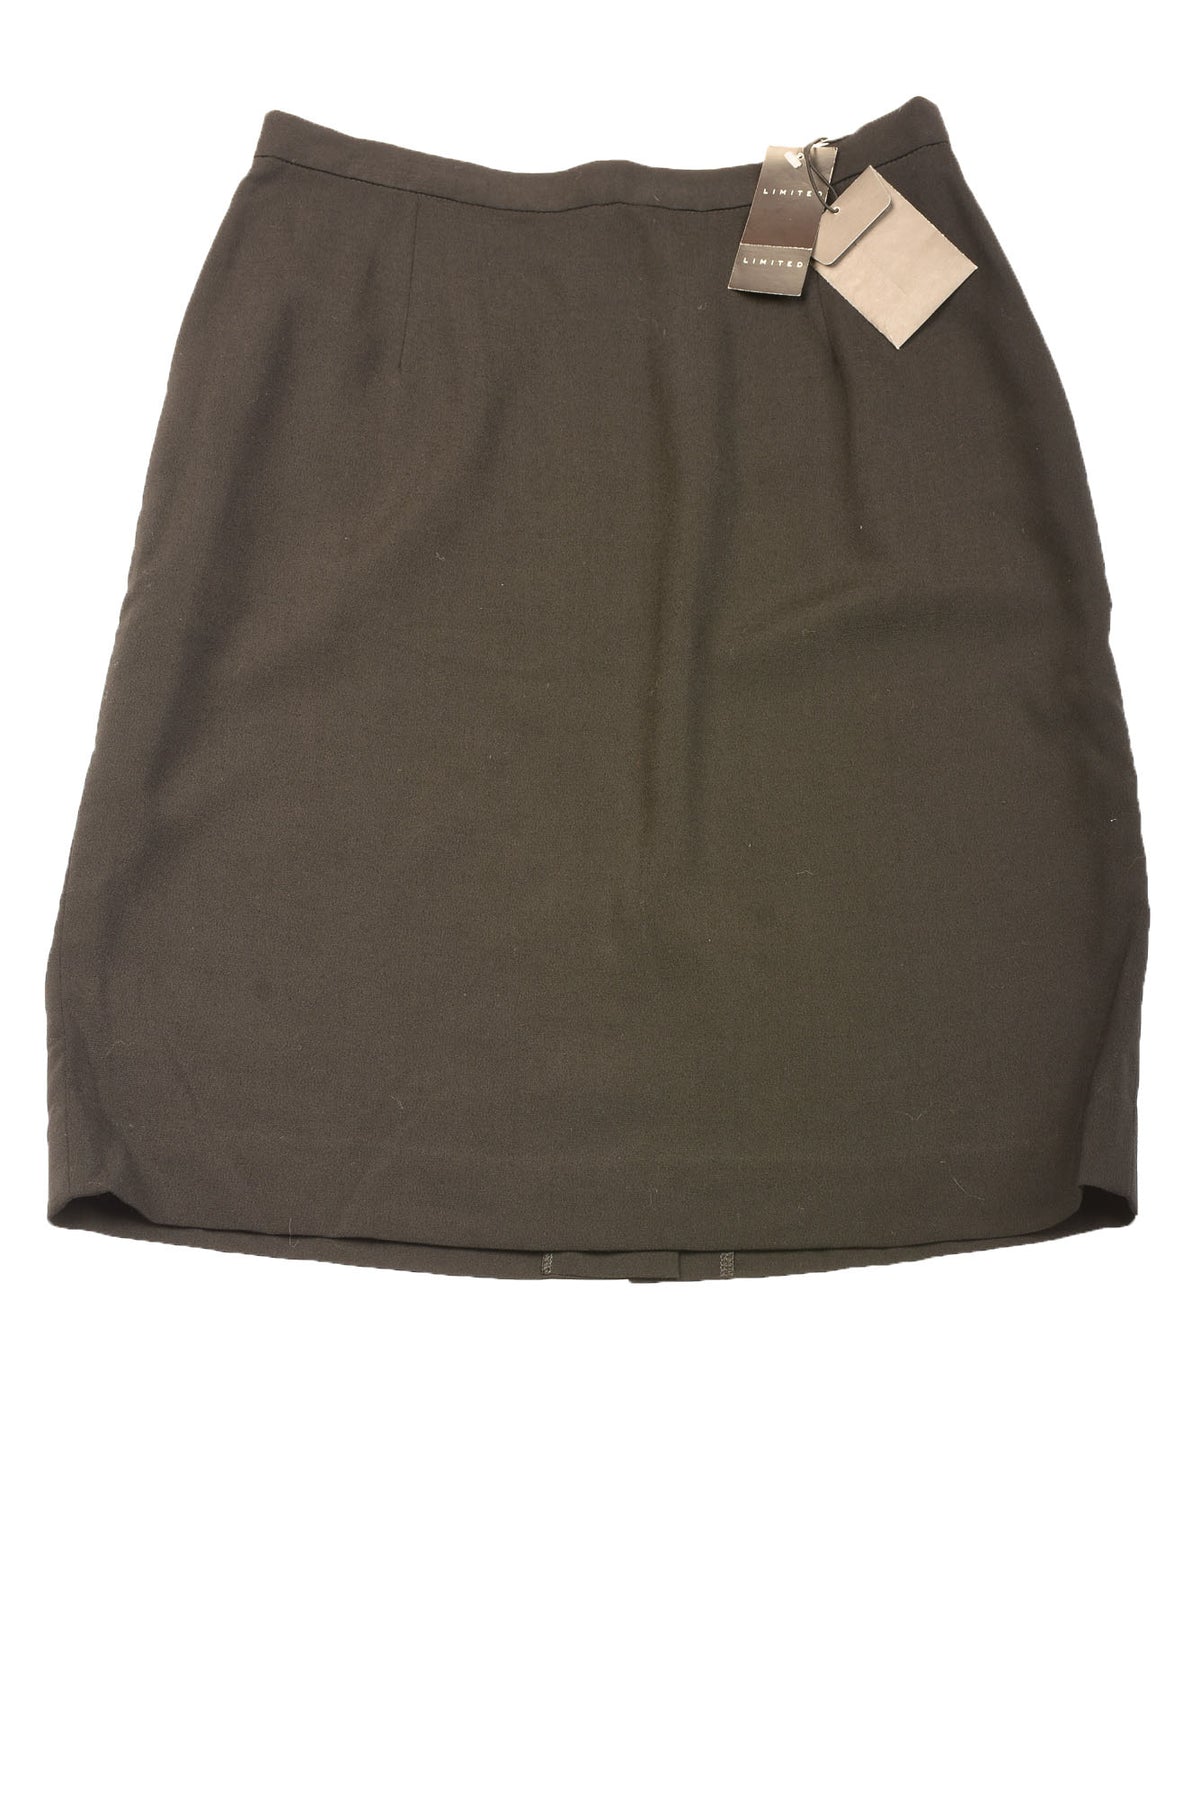 Limited Size 6 Women&#39;s Skirt